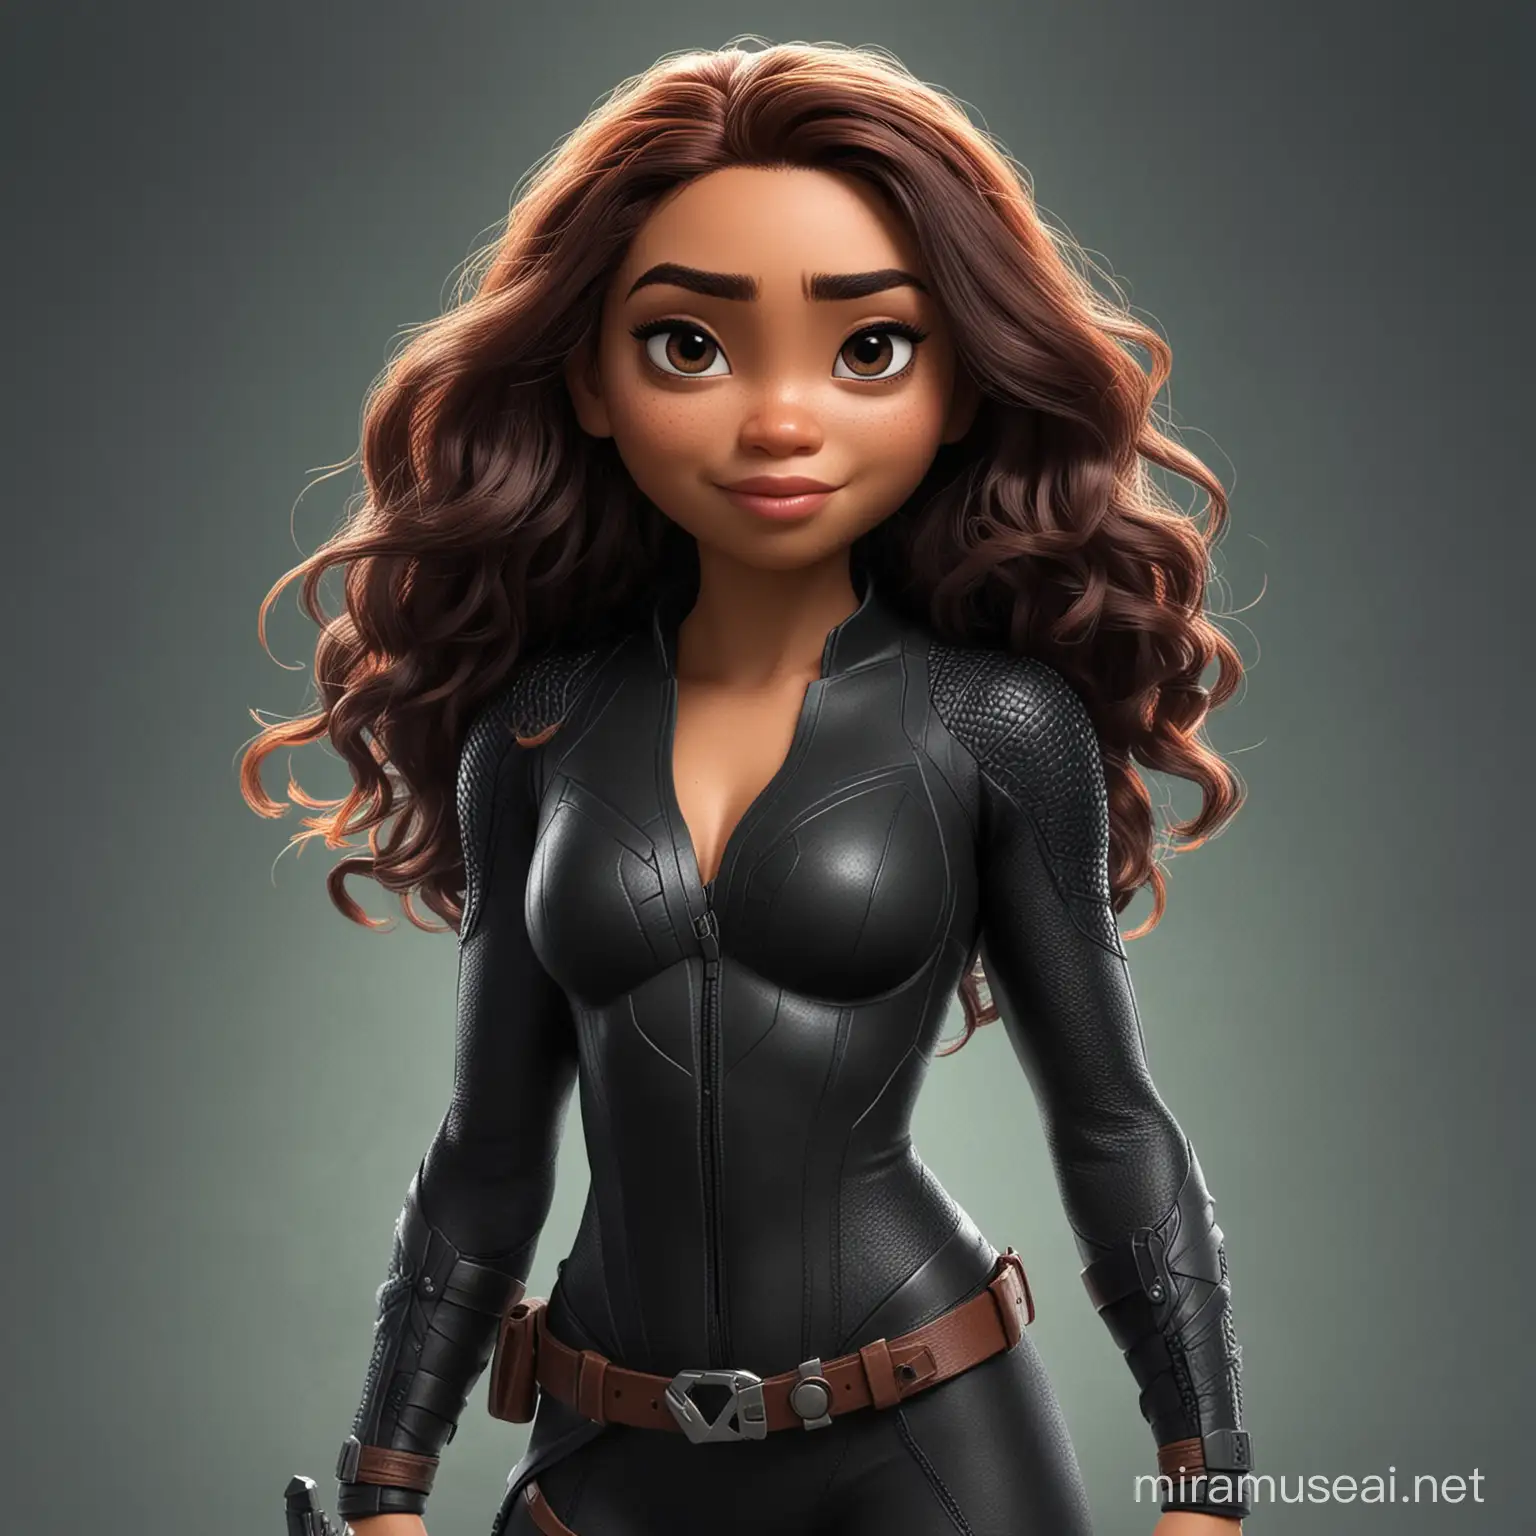 Moana Cosplays as Black Widow for Marvel Fan Event